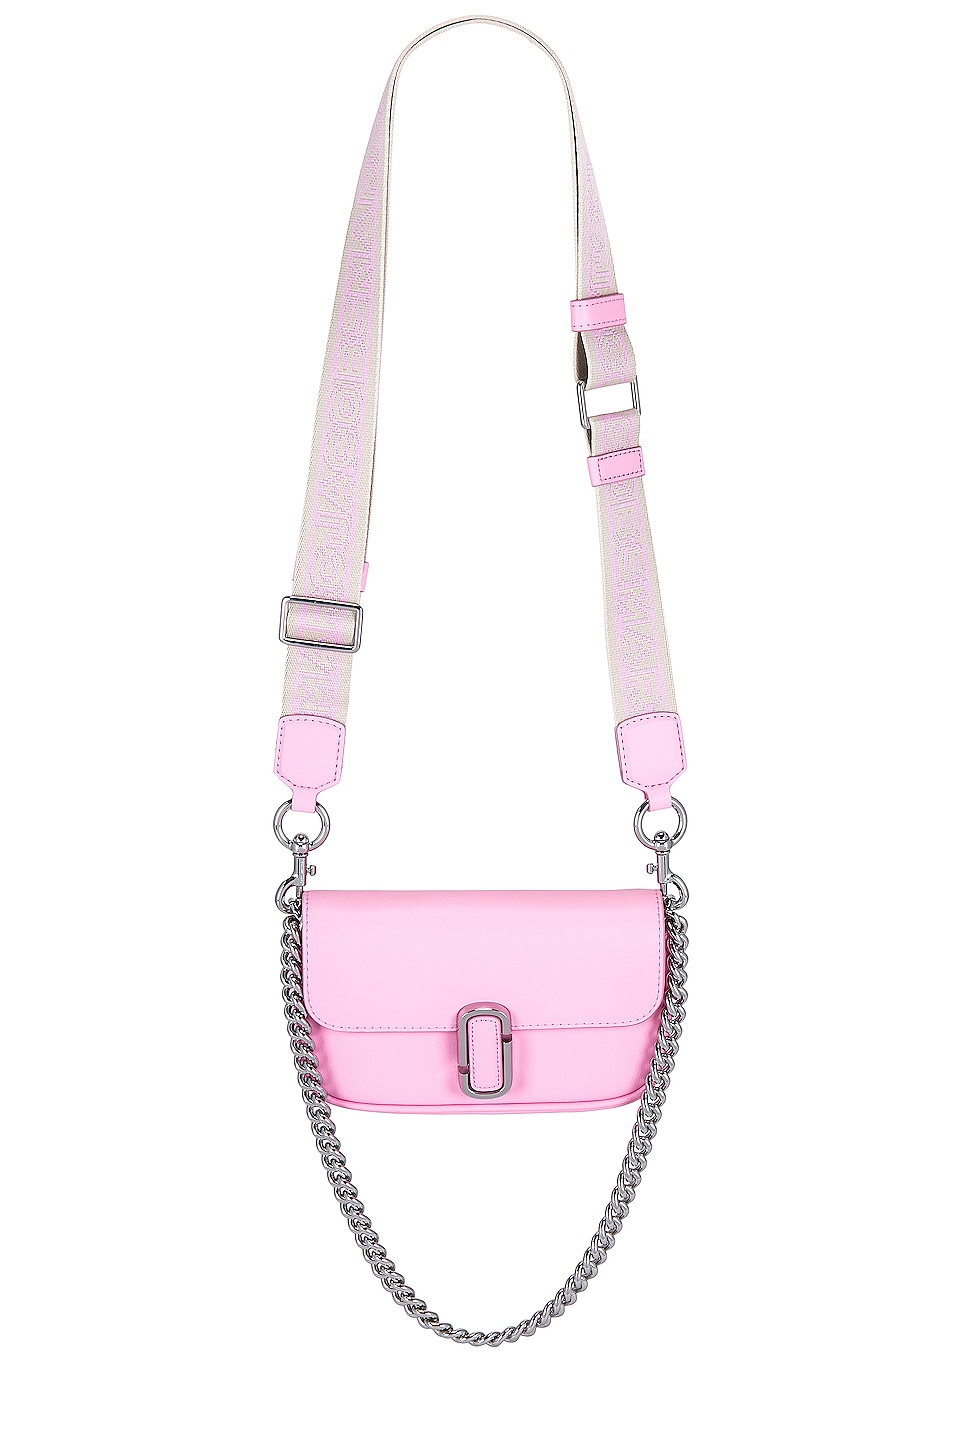 Marc Jacobs The Mini Pillow Shoulder Bag In Bubblegum Leather in